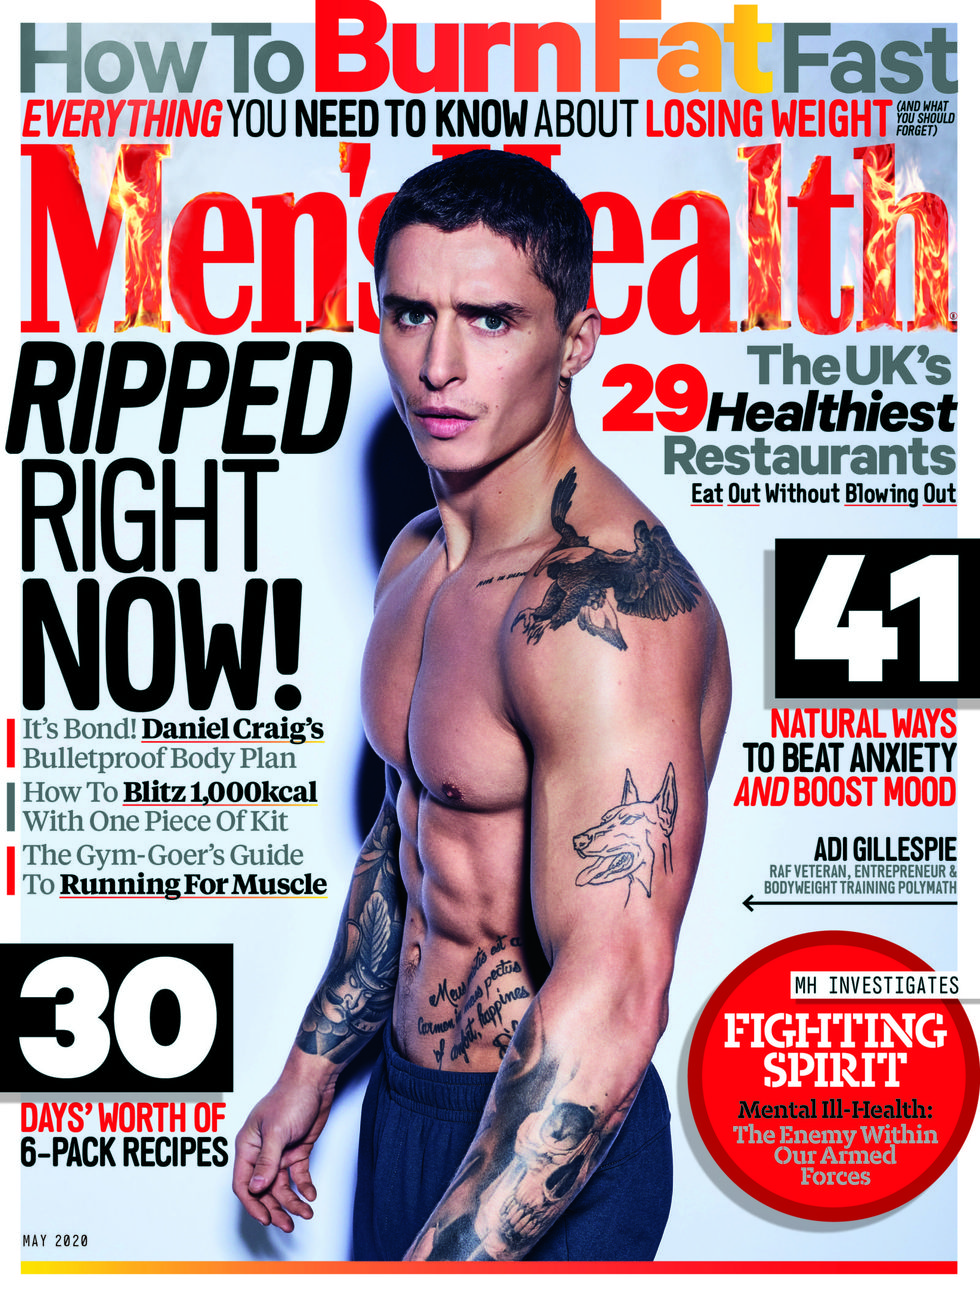 Buy the new issue of Men's Health